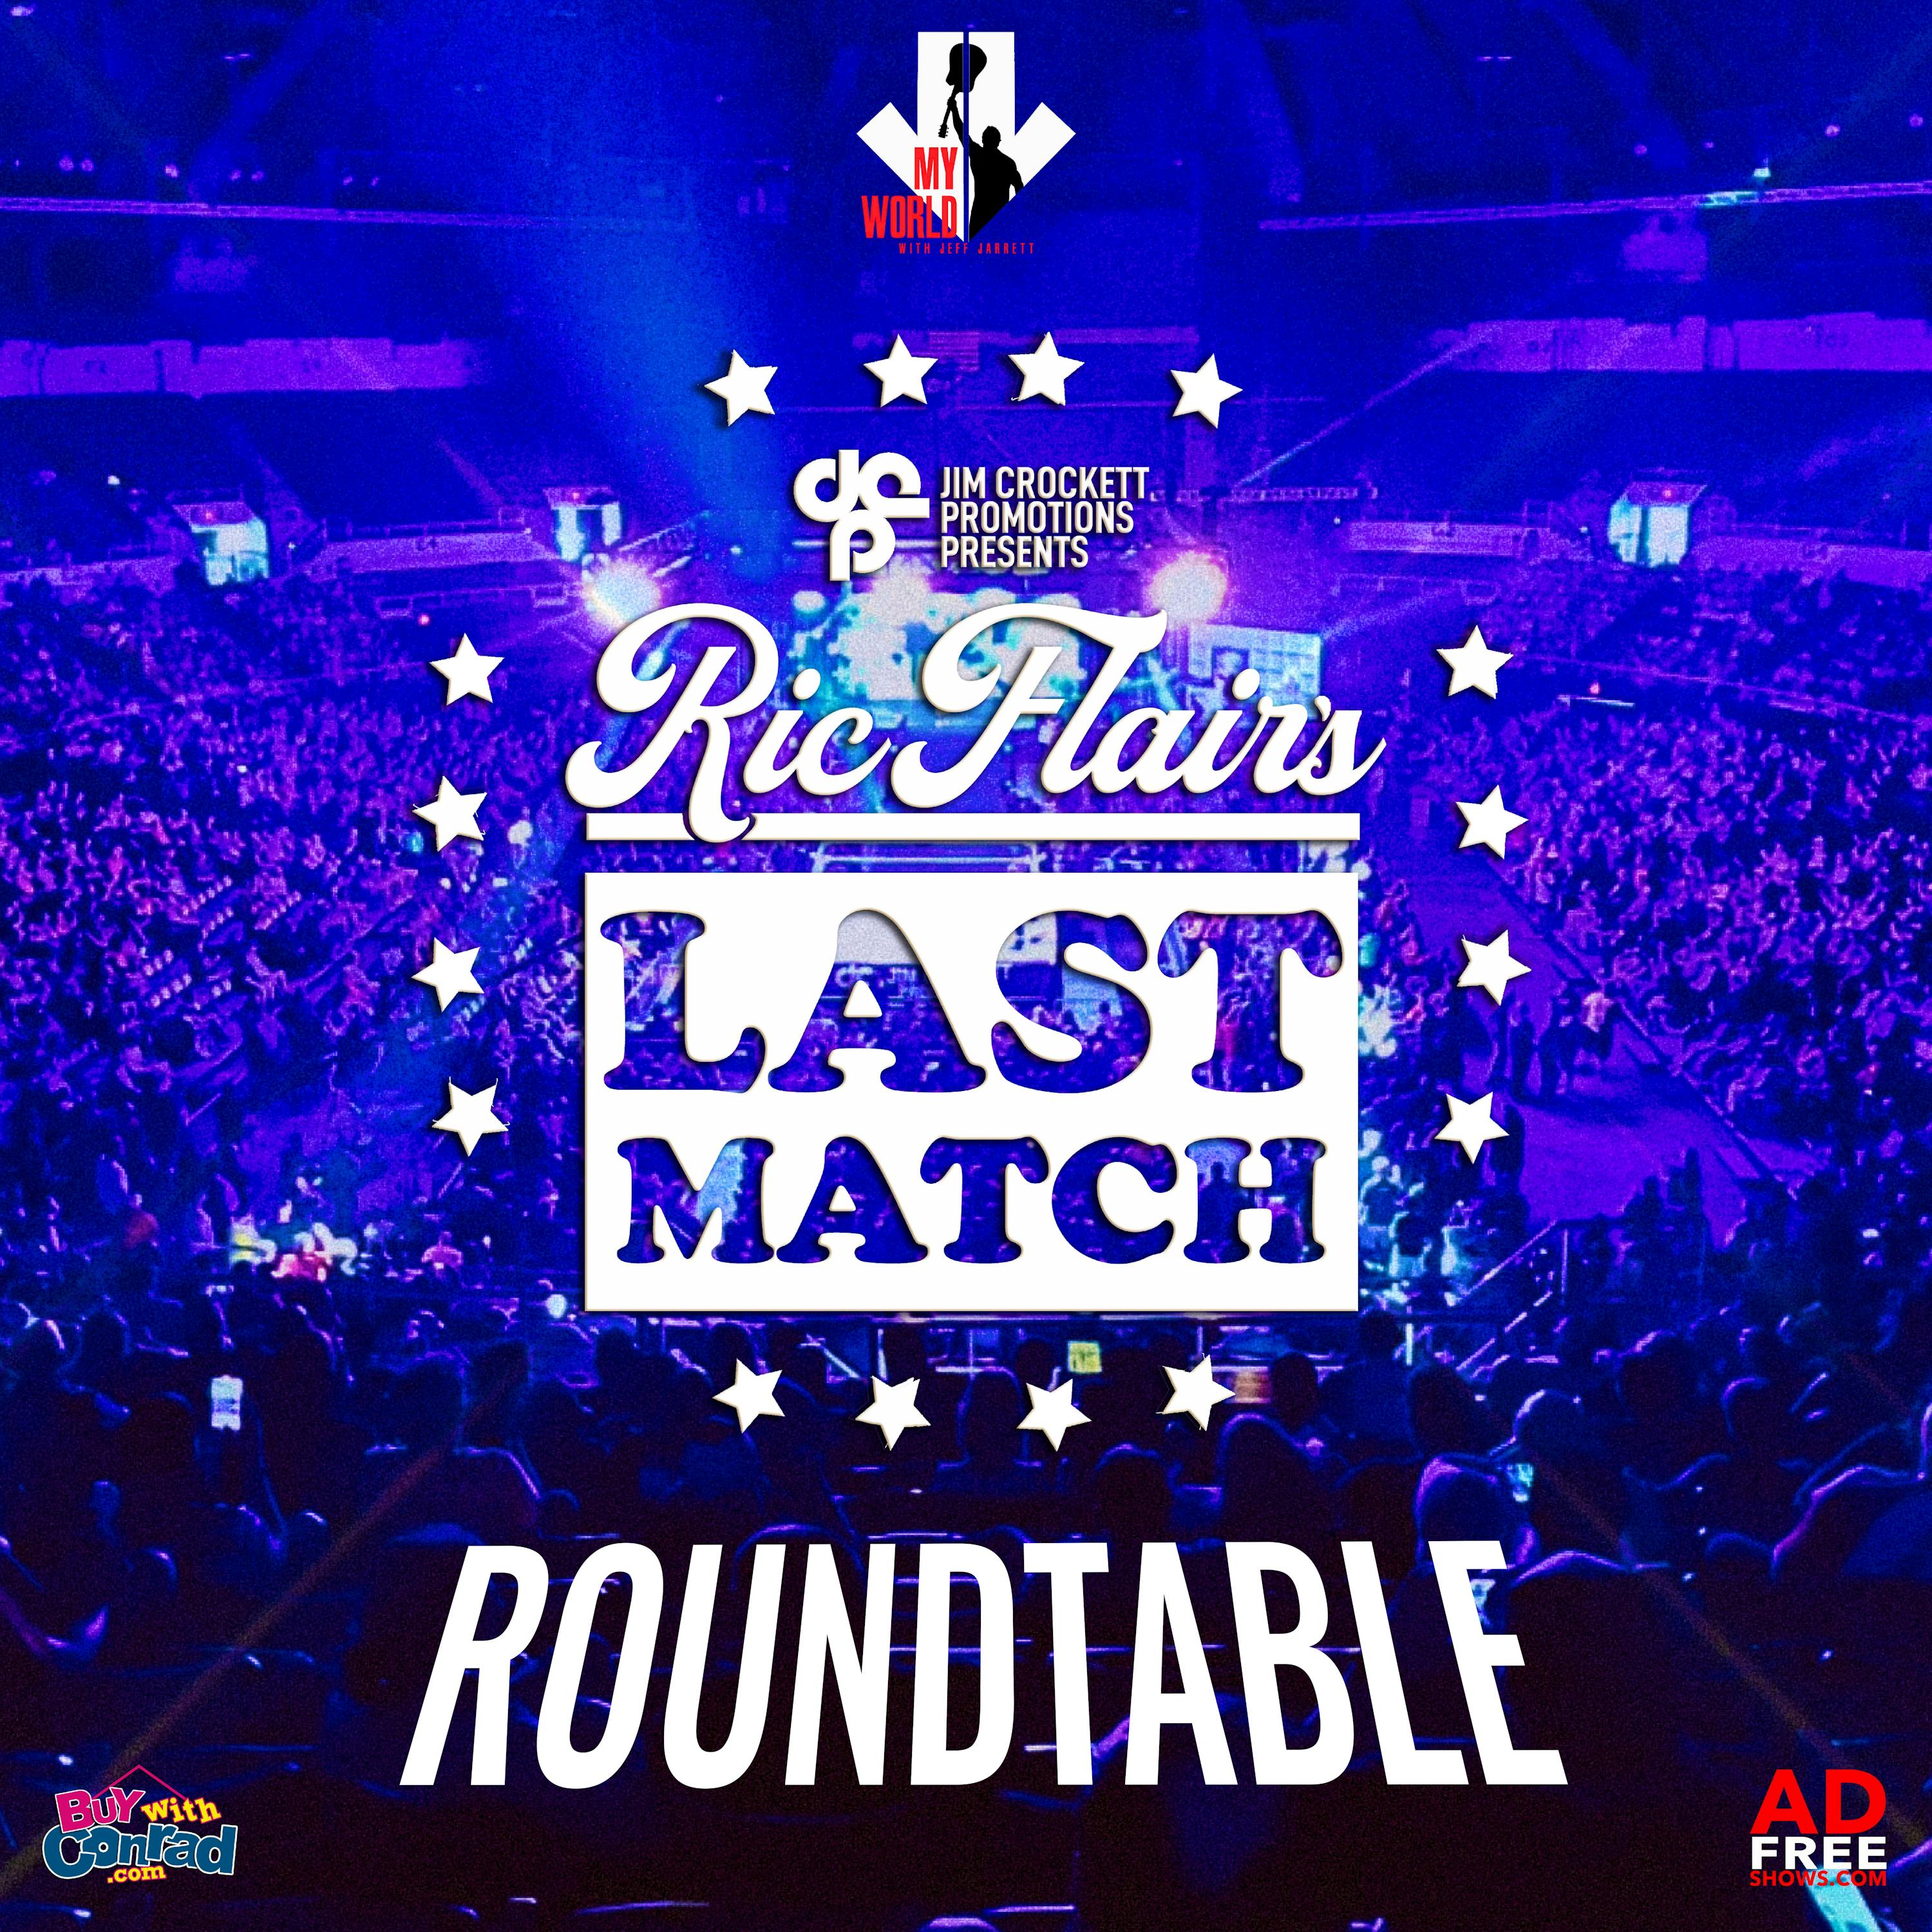 Episode 66: My World with Jeff Jarrett Presents: Ric Flair’s Last Match Roundtable